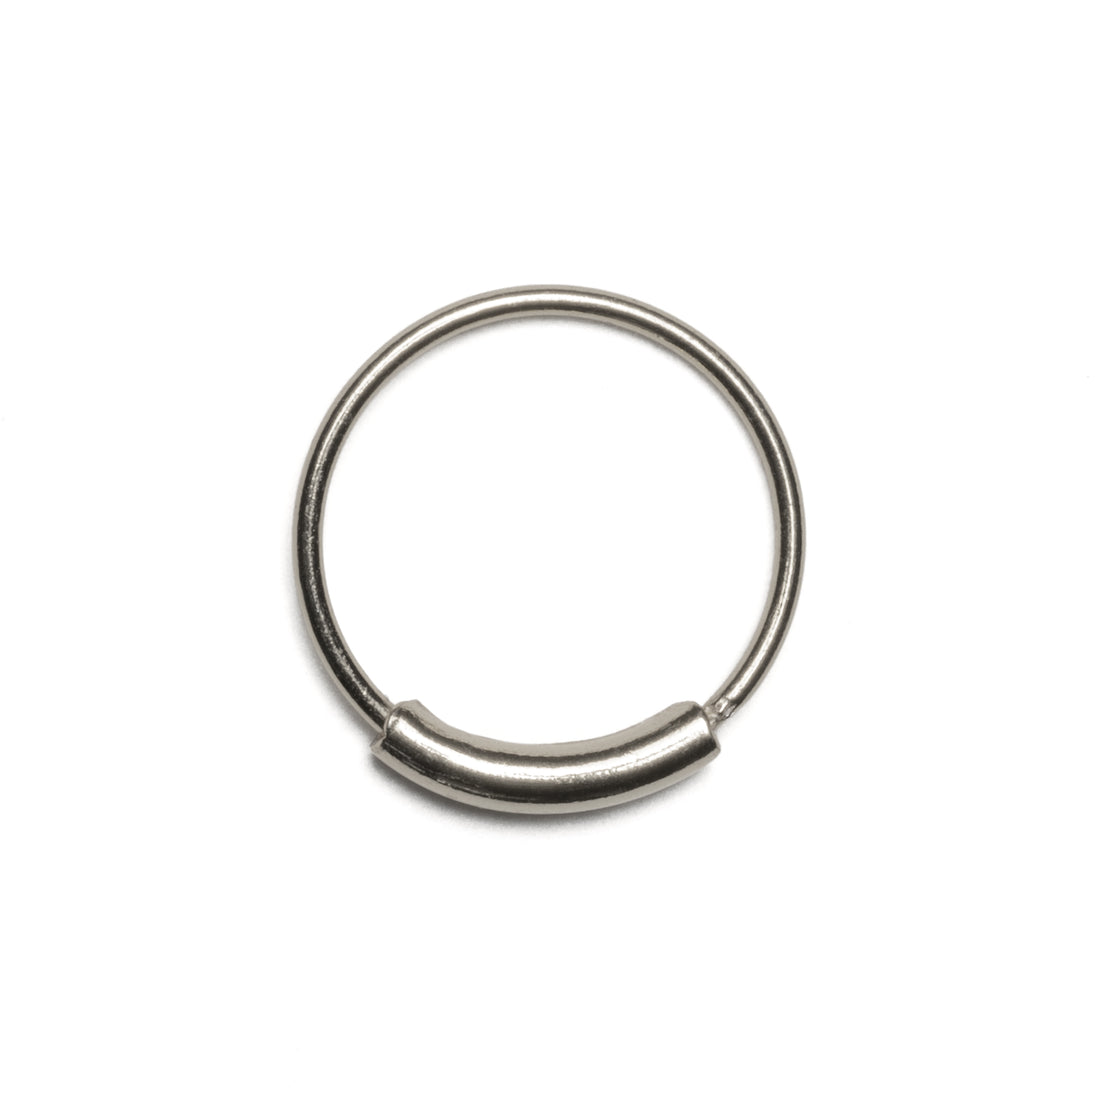 Pirate silver nose ring frontal view